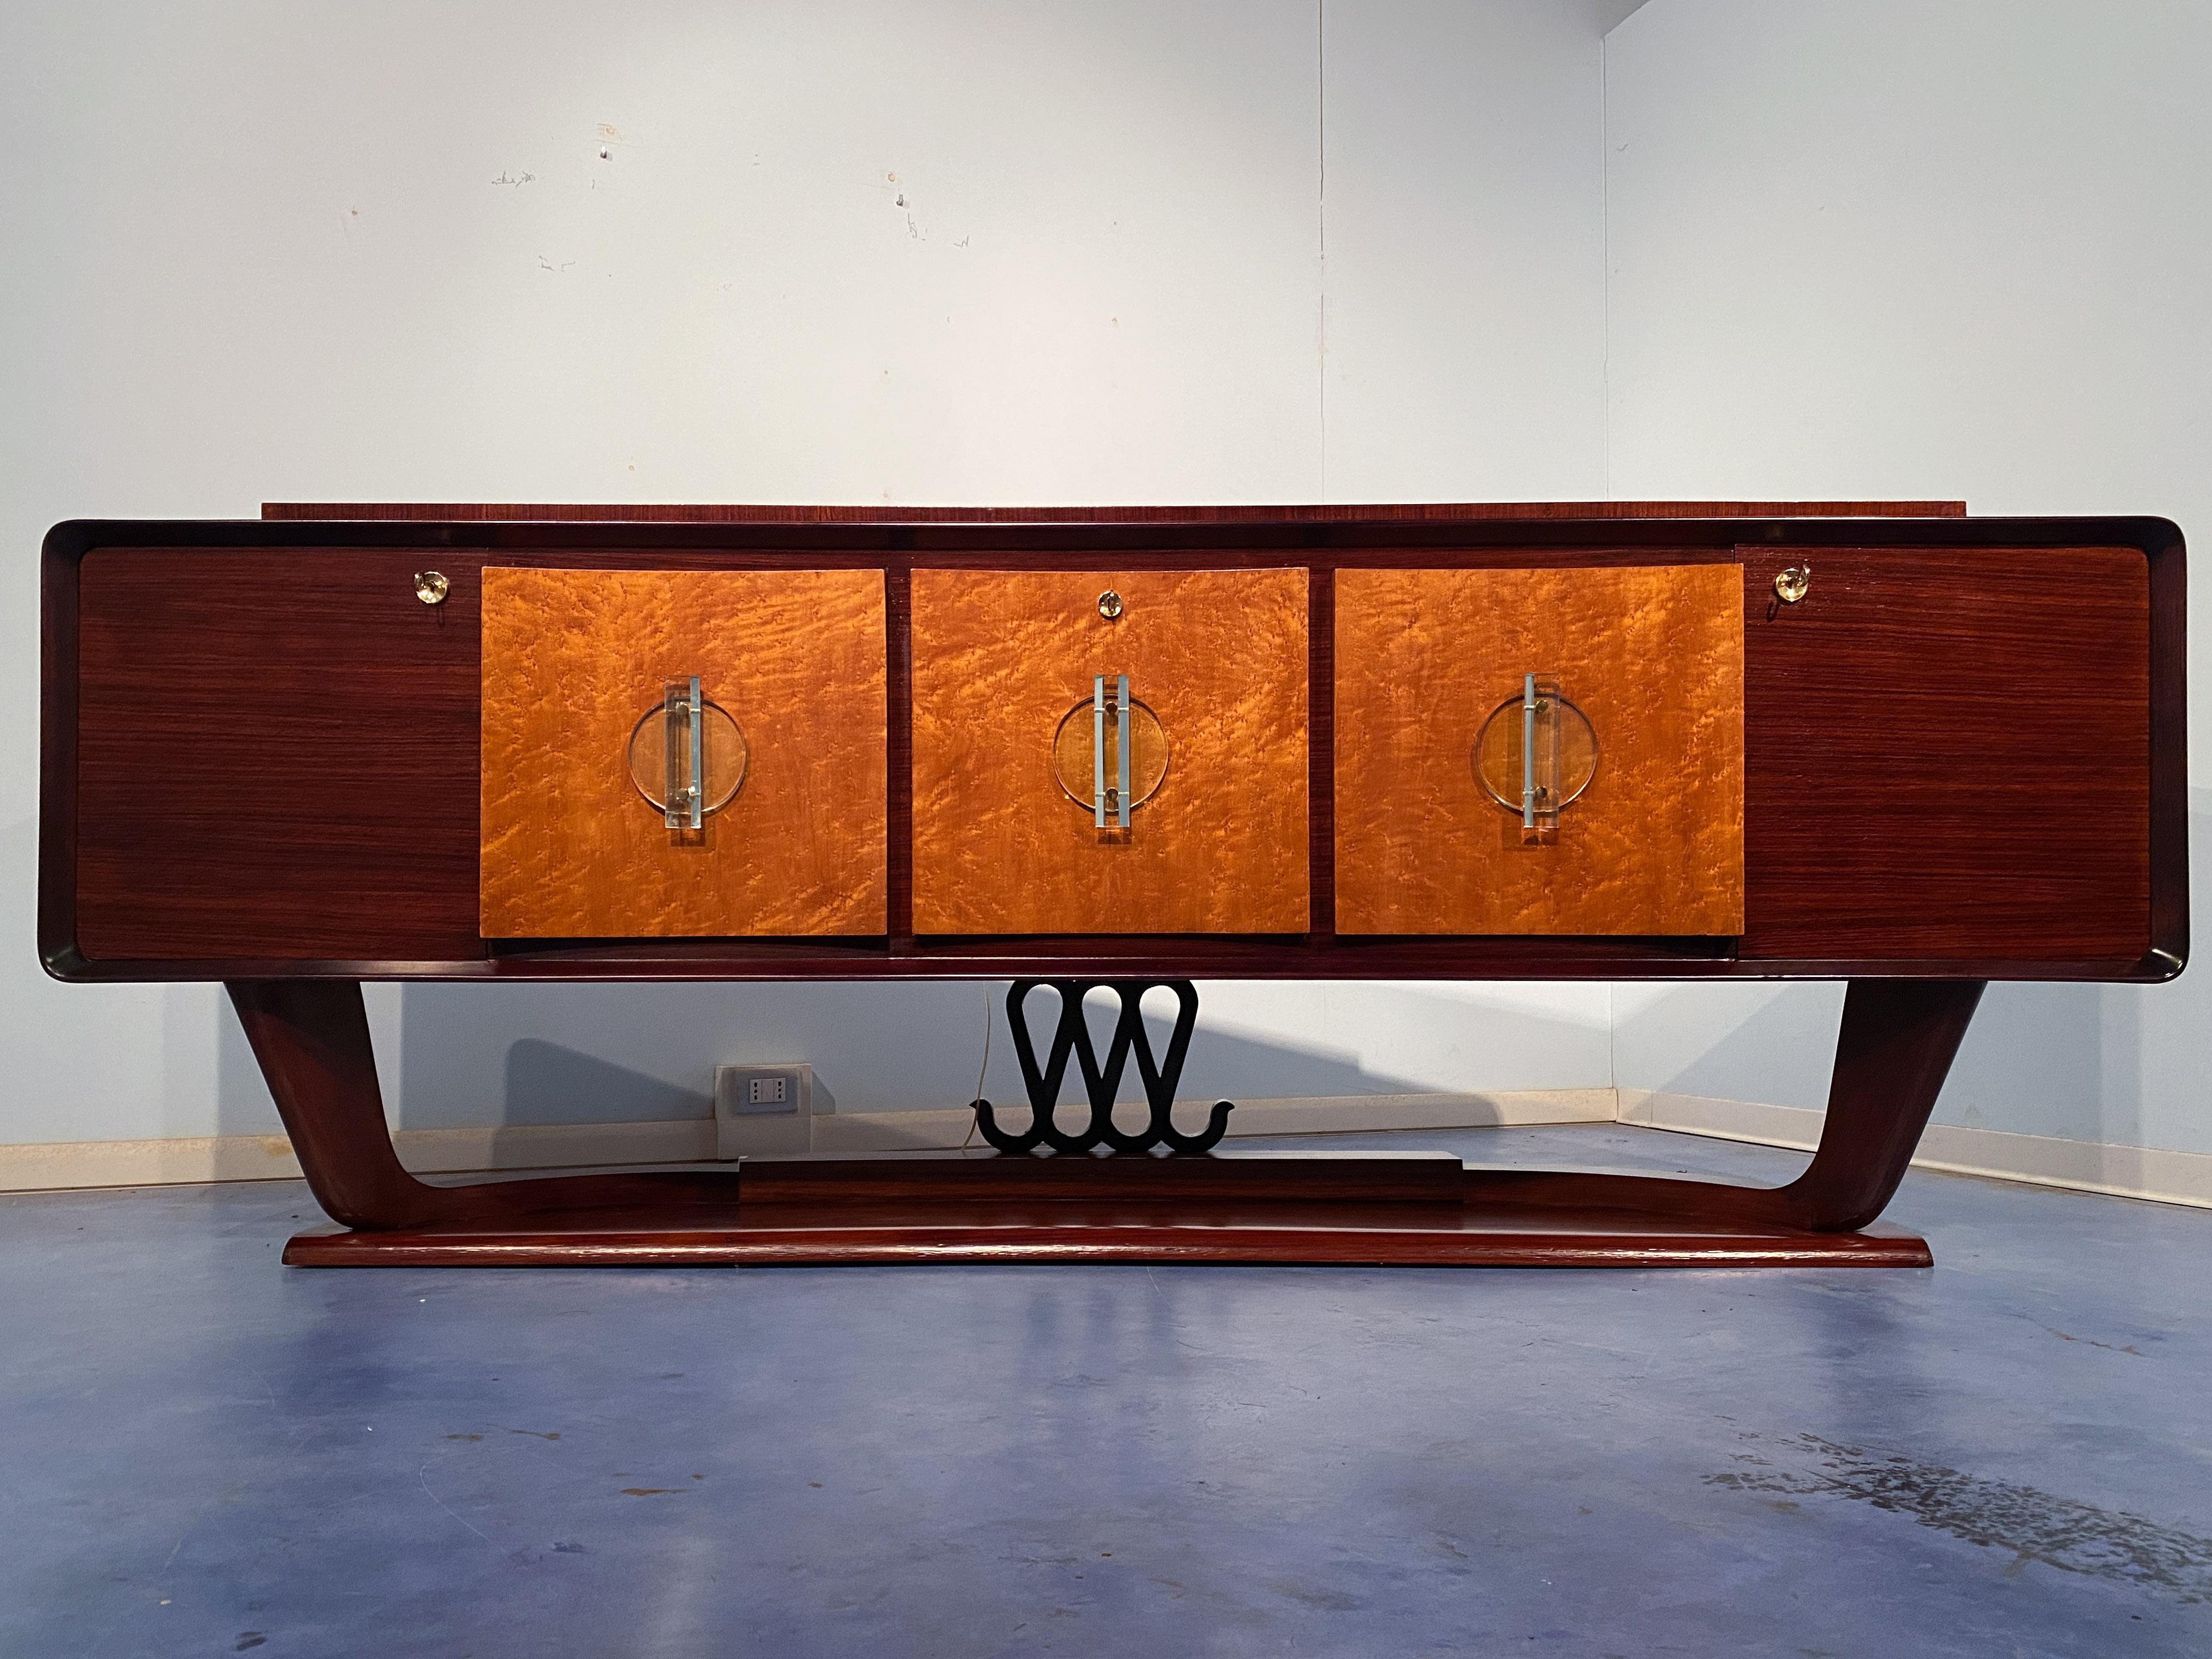 Italian Art Deco Sideboard with Bar Cabinet Attributed to Osvaldo Borsani, 1940s For Sale 10